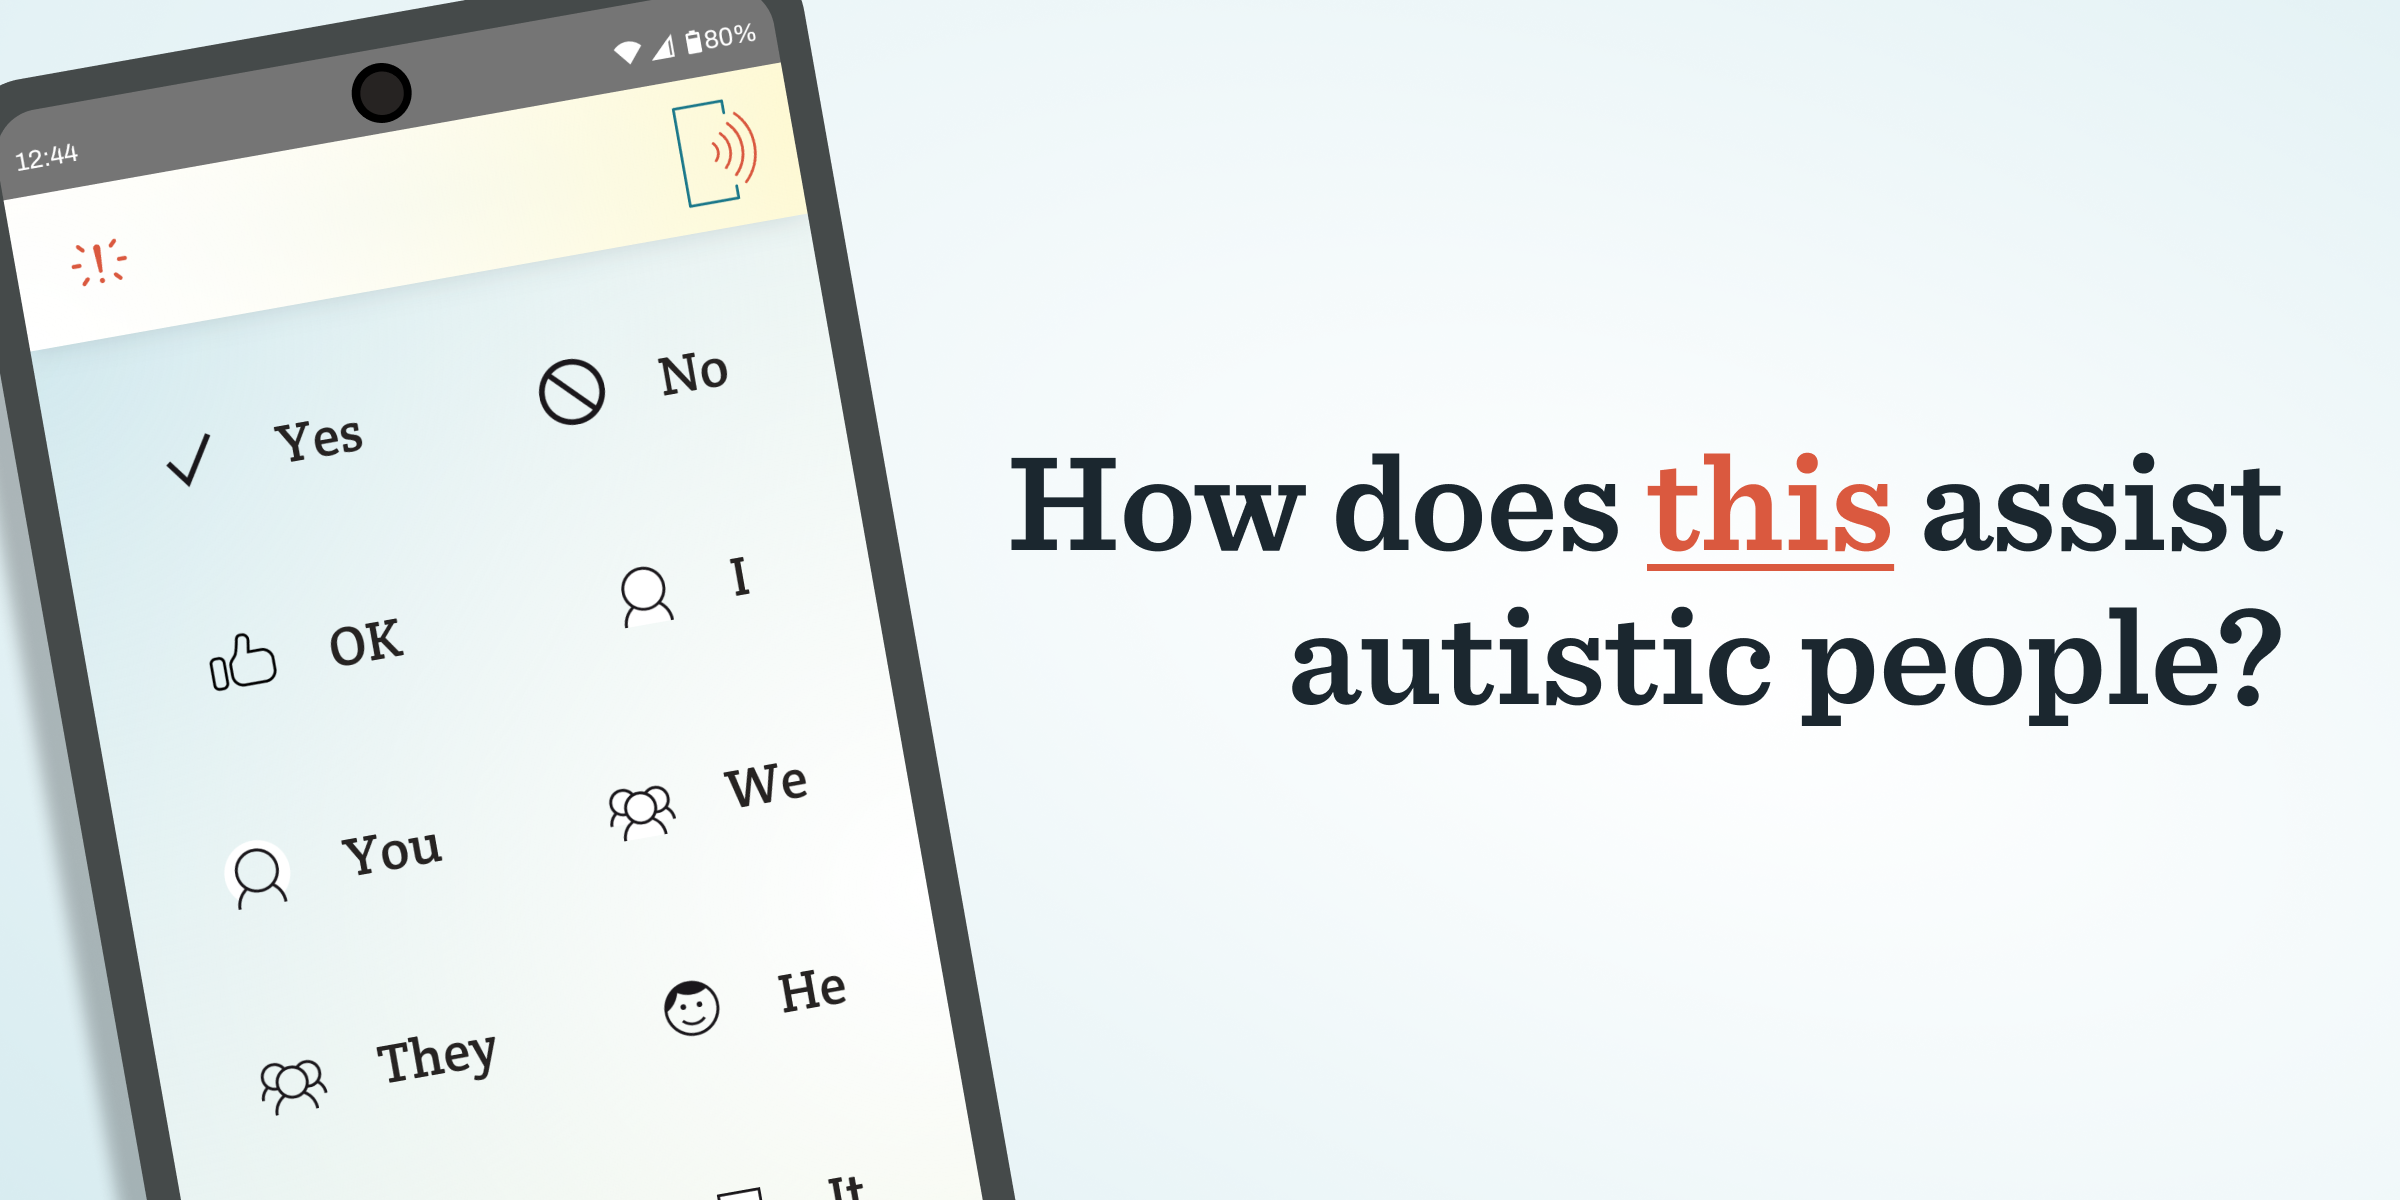 An image of the Spoken app, one of many apps for nonverbal autism, beside the question 'How does this assist autistic people?' which refers to AAC for autism.